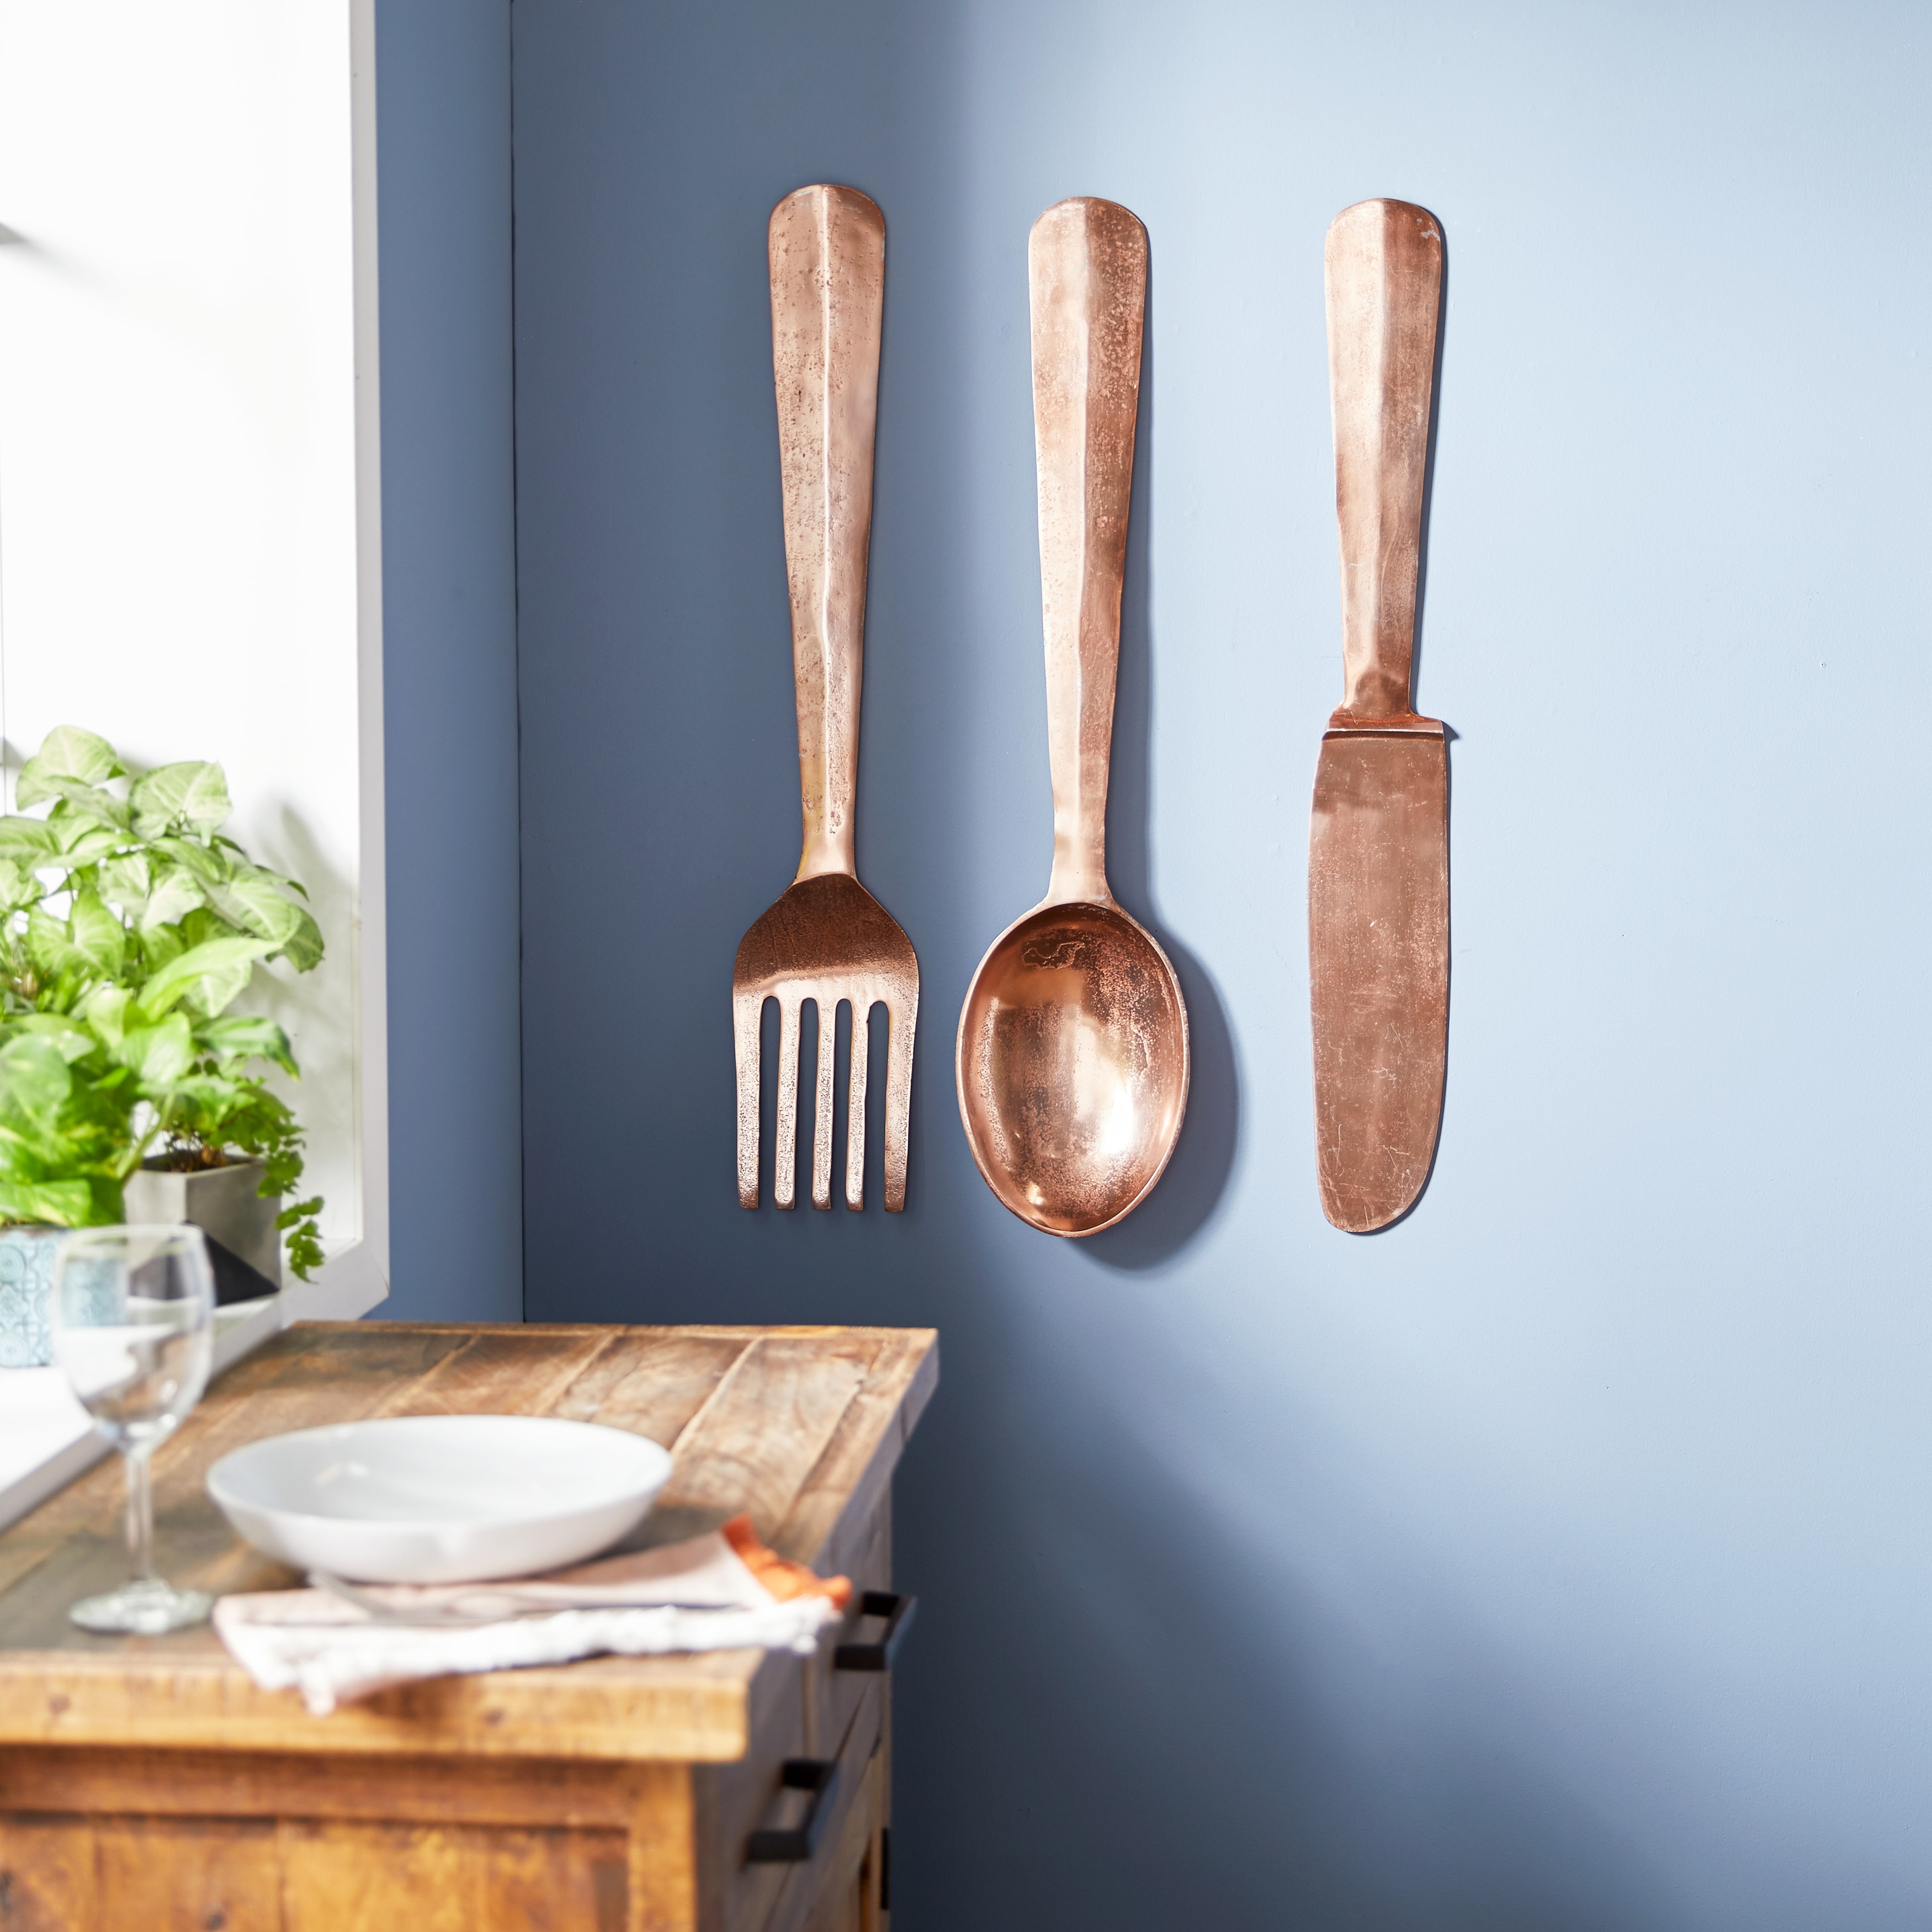 https://ak1.ostkcdn.com/images/products/is/images/direct/b5f8e138be491ef684d711efde568d74a8af3cb9/Copper-Grove-Seymour-Cutlery-Wall-Decor-%28Set-of-3%29.jpg